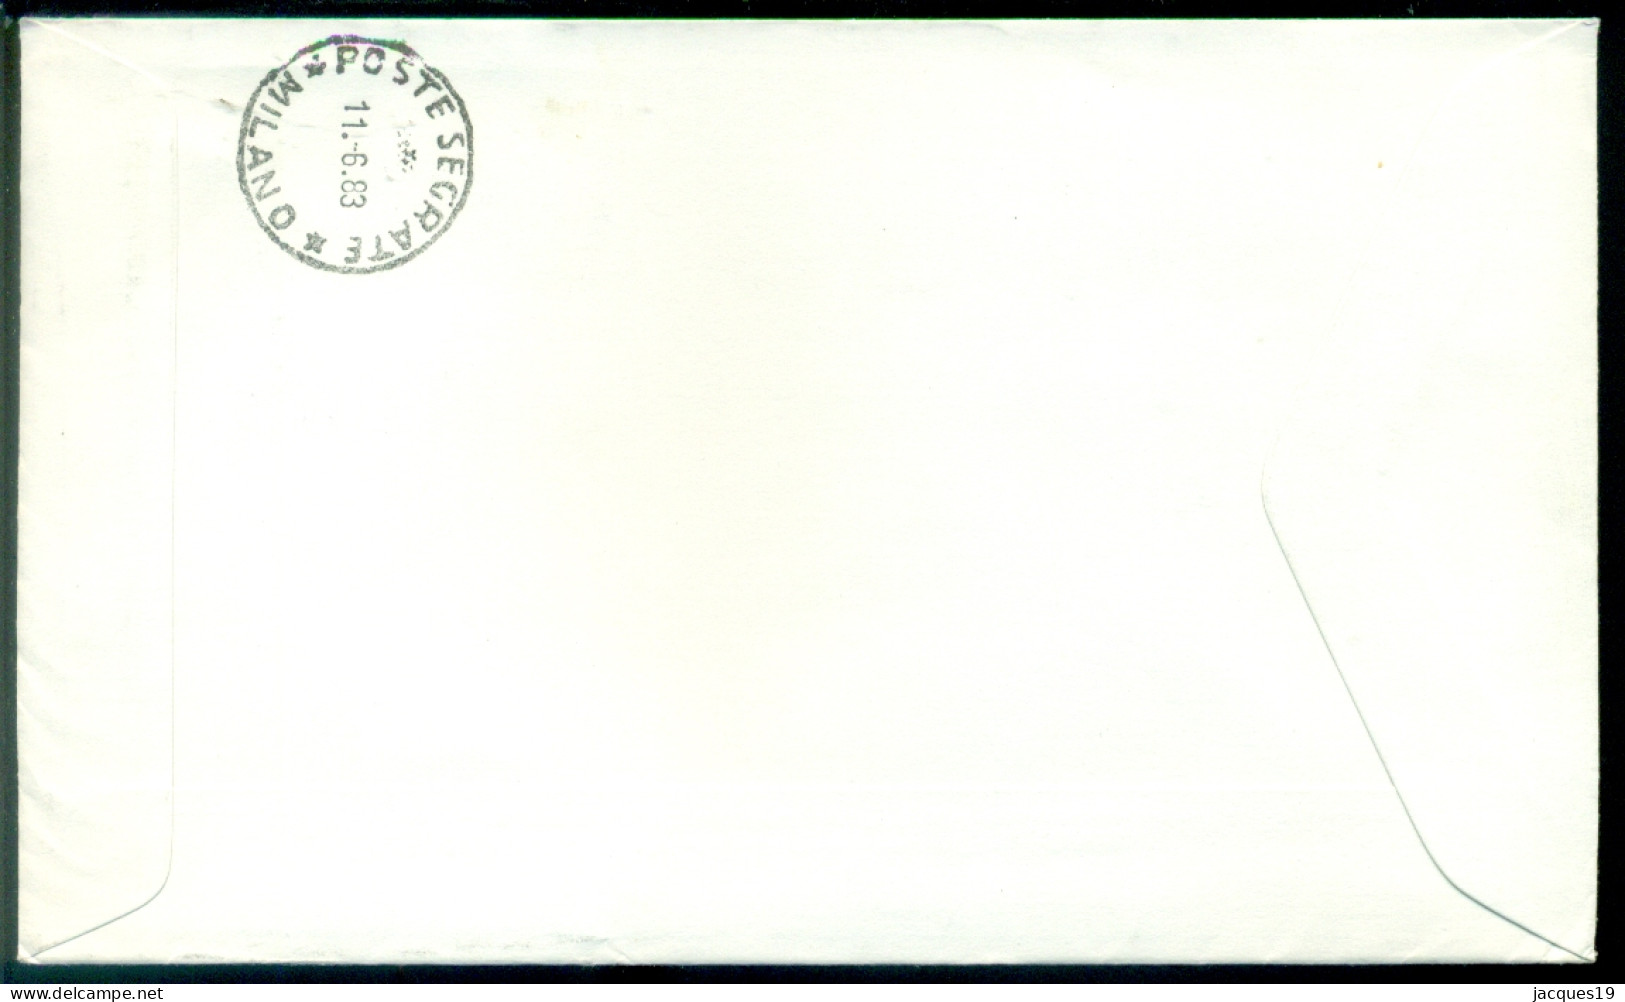 Great Britain 1983 FDC Wales Machins - Gales